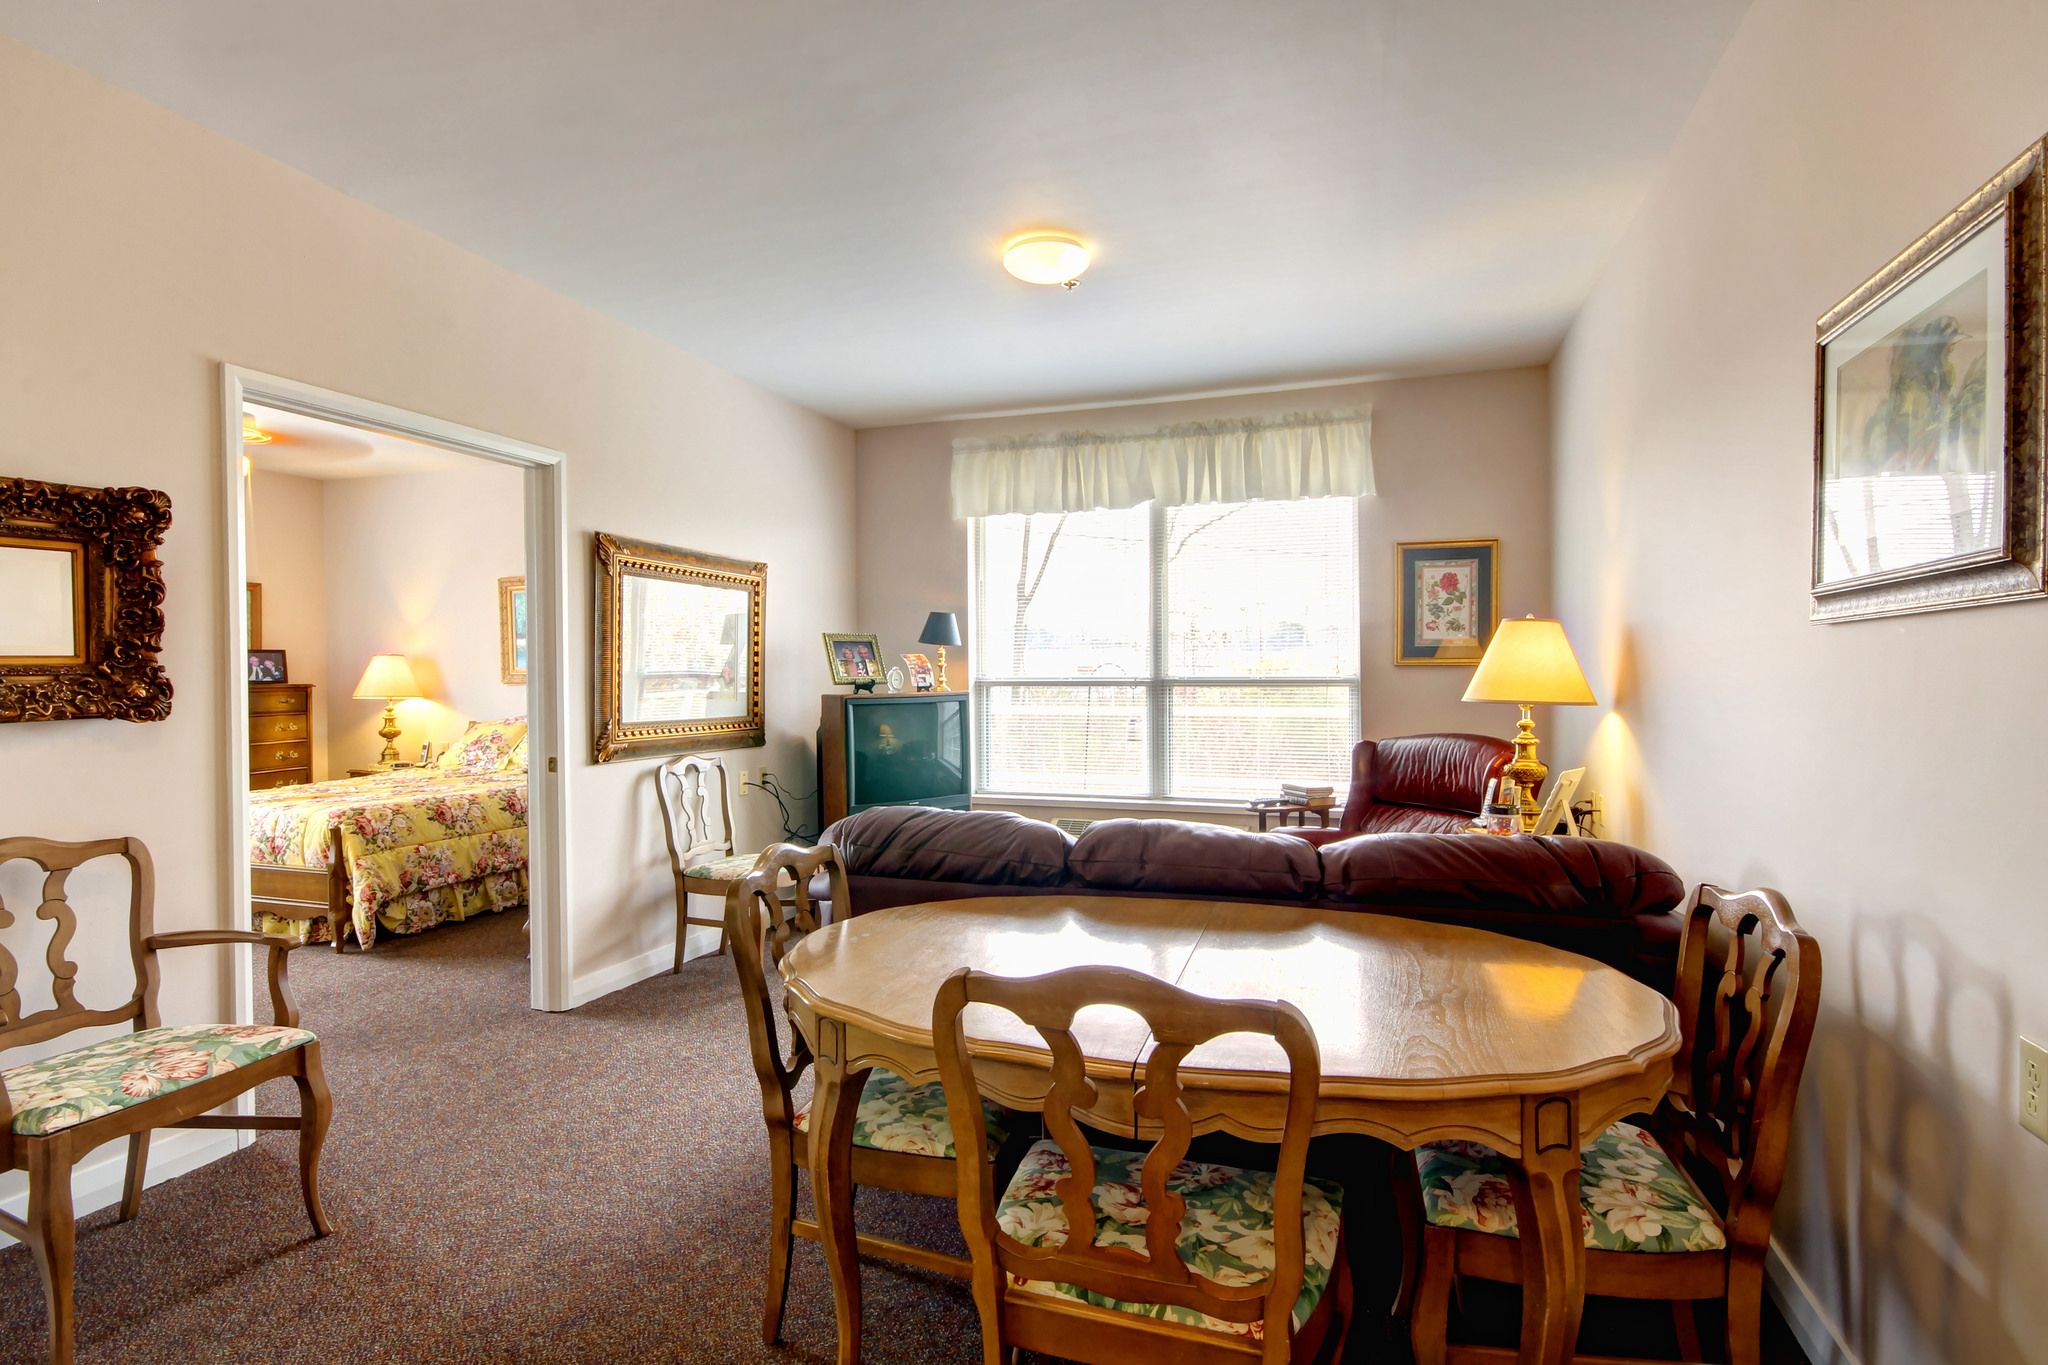 Interior view of Branchwater Village Senior Living Community featuring dining room, living room and decor.